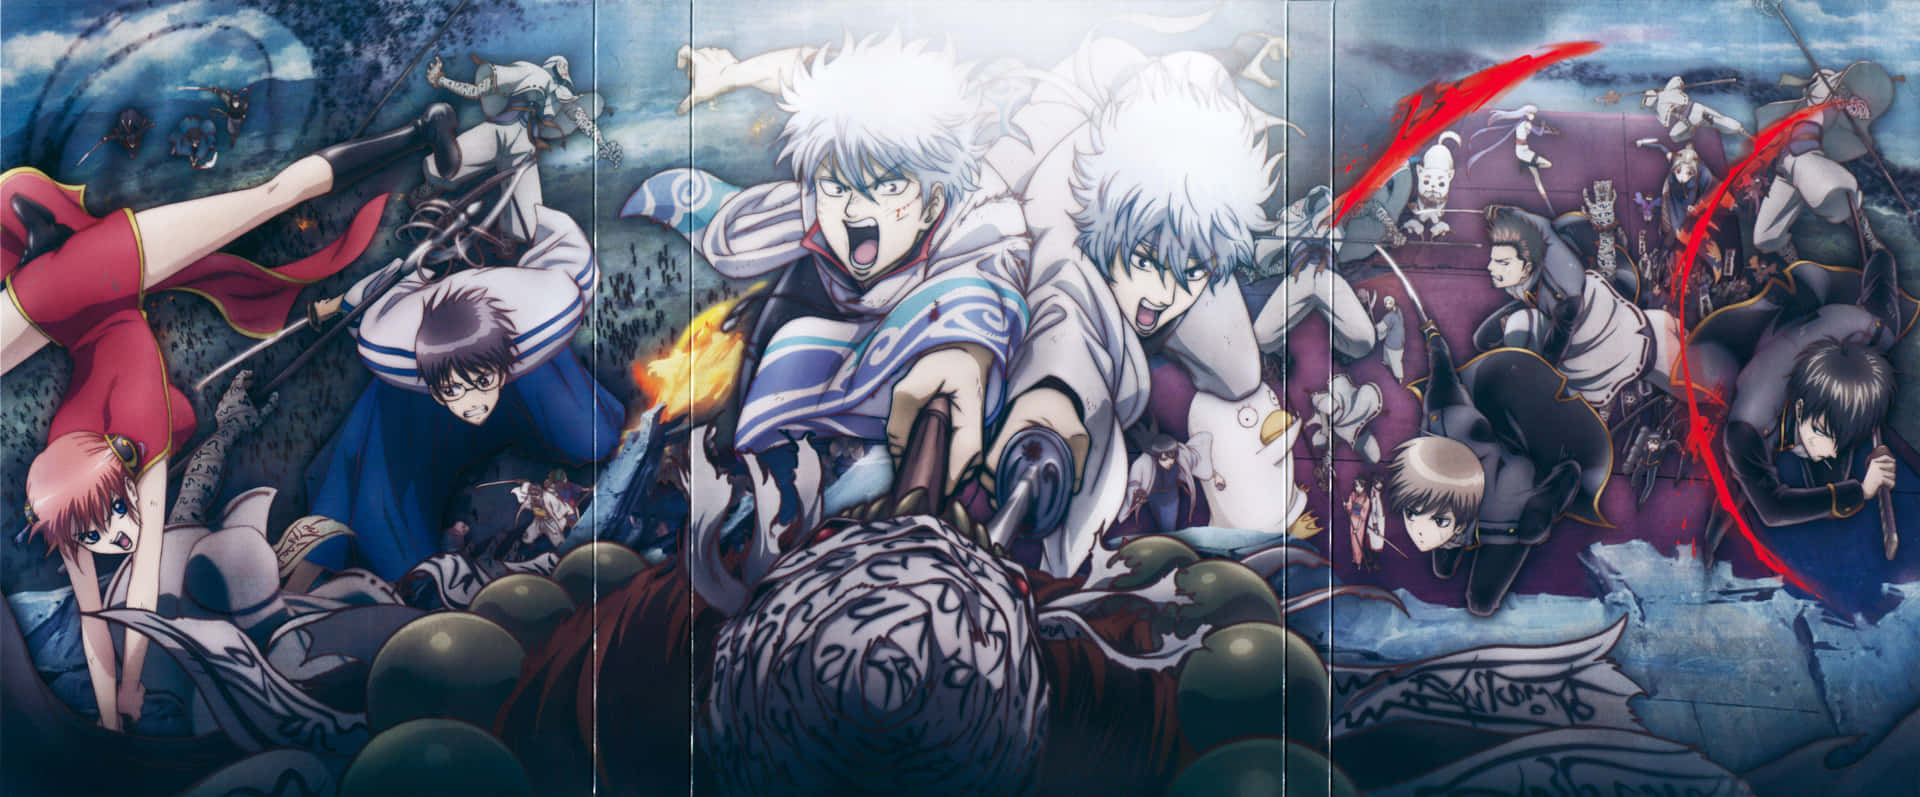 Join the adventure with Gintama and friends! Wallpaper